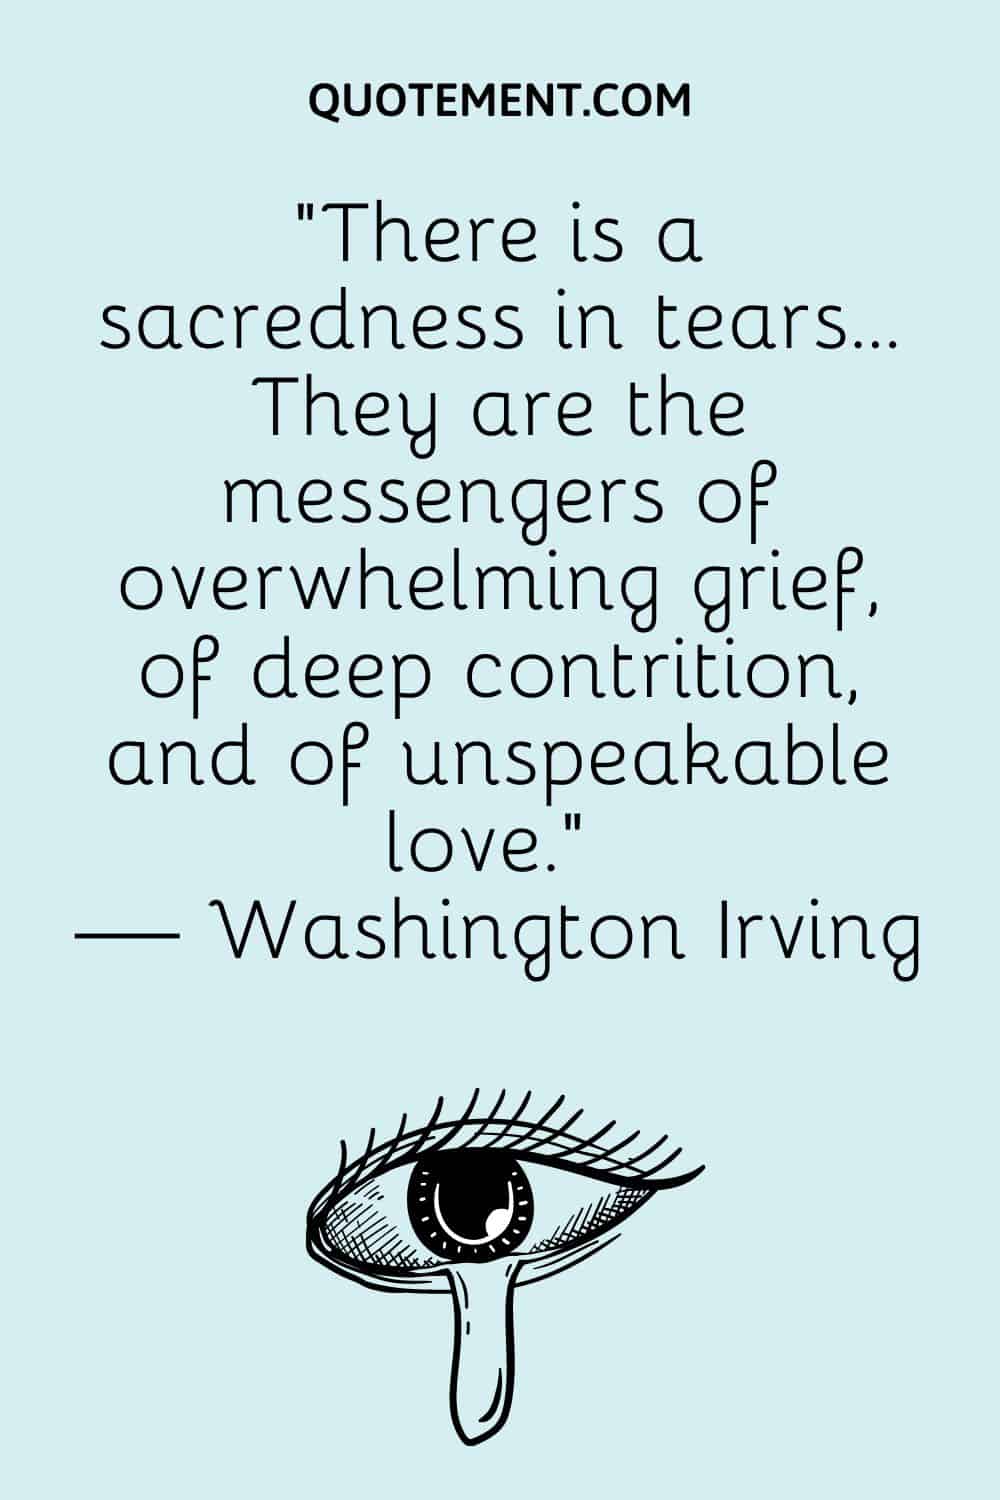 “There is a sacredness in tears…They are the messengers of overwhelming grief, of deep contrition, and of unspeakable love.” — Washington Irving